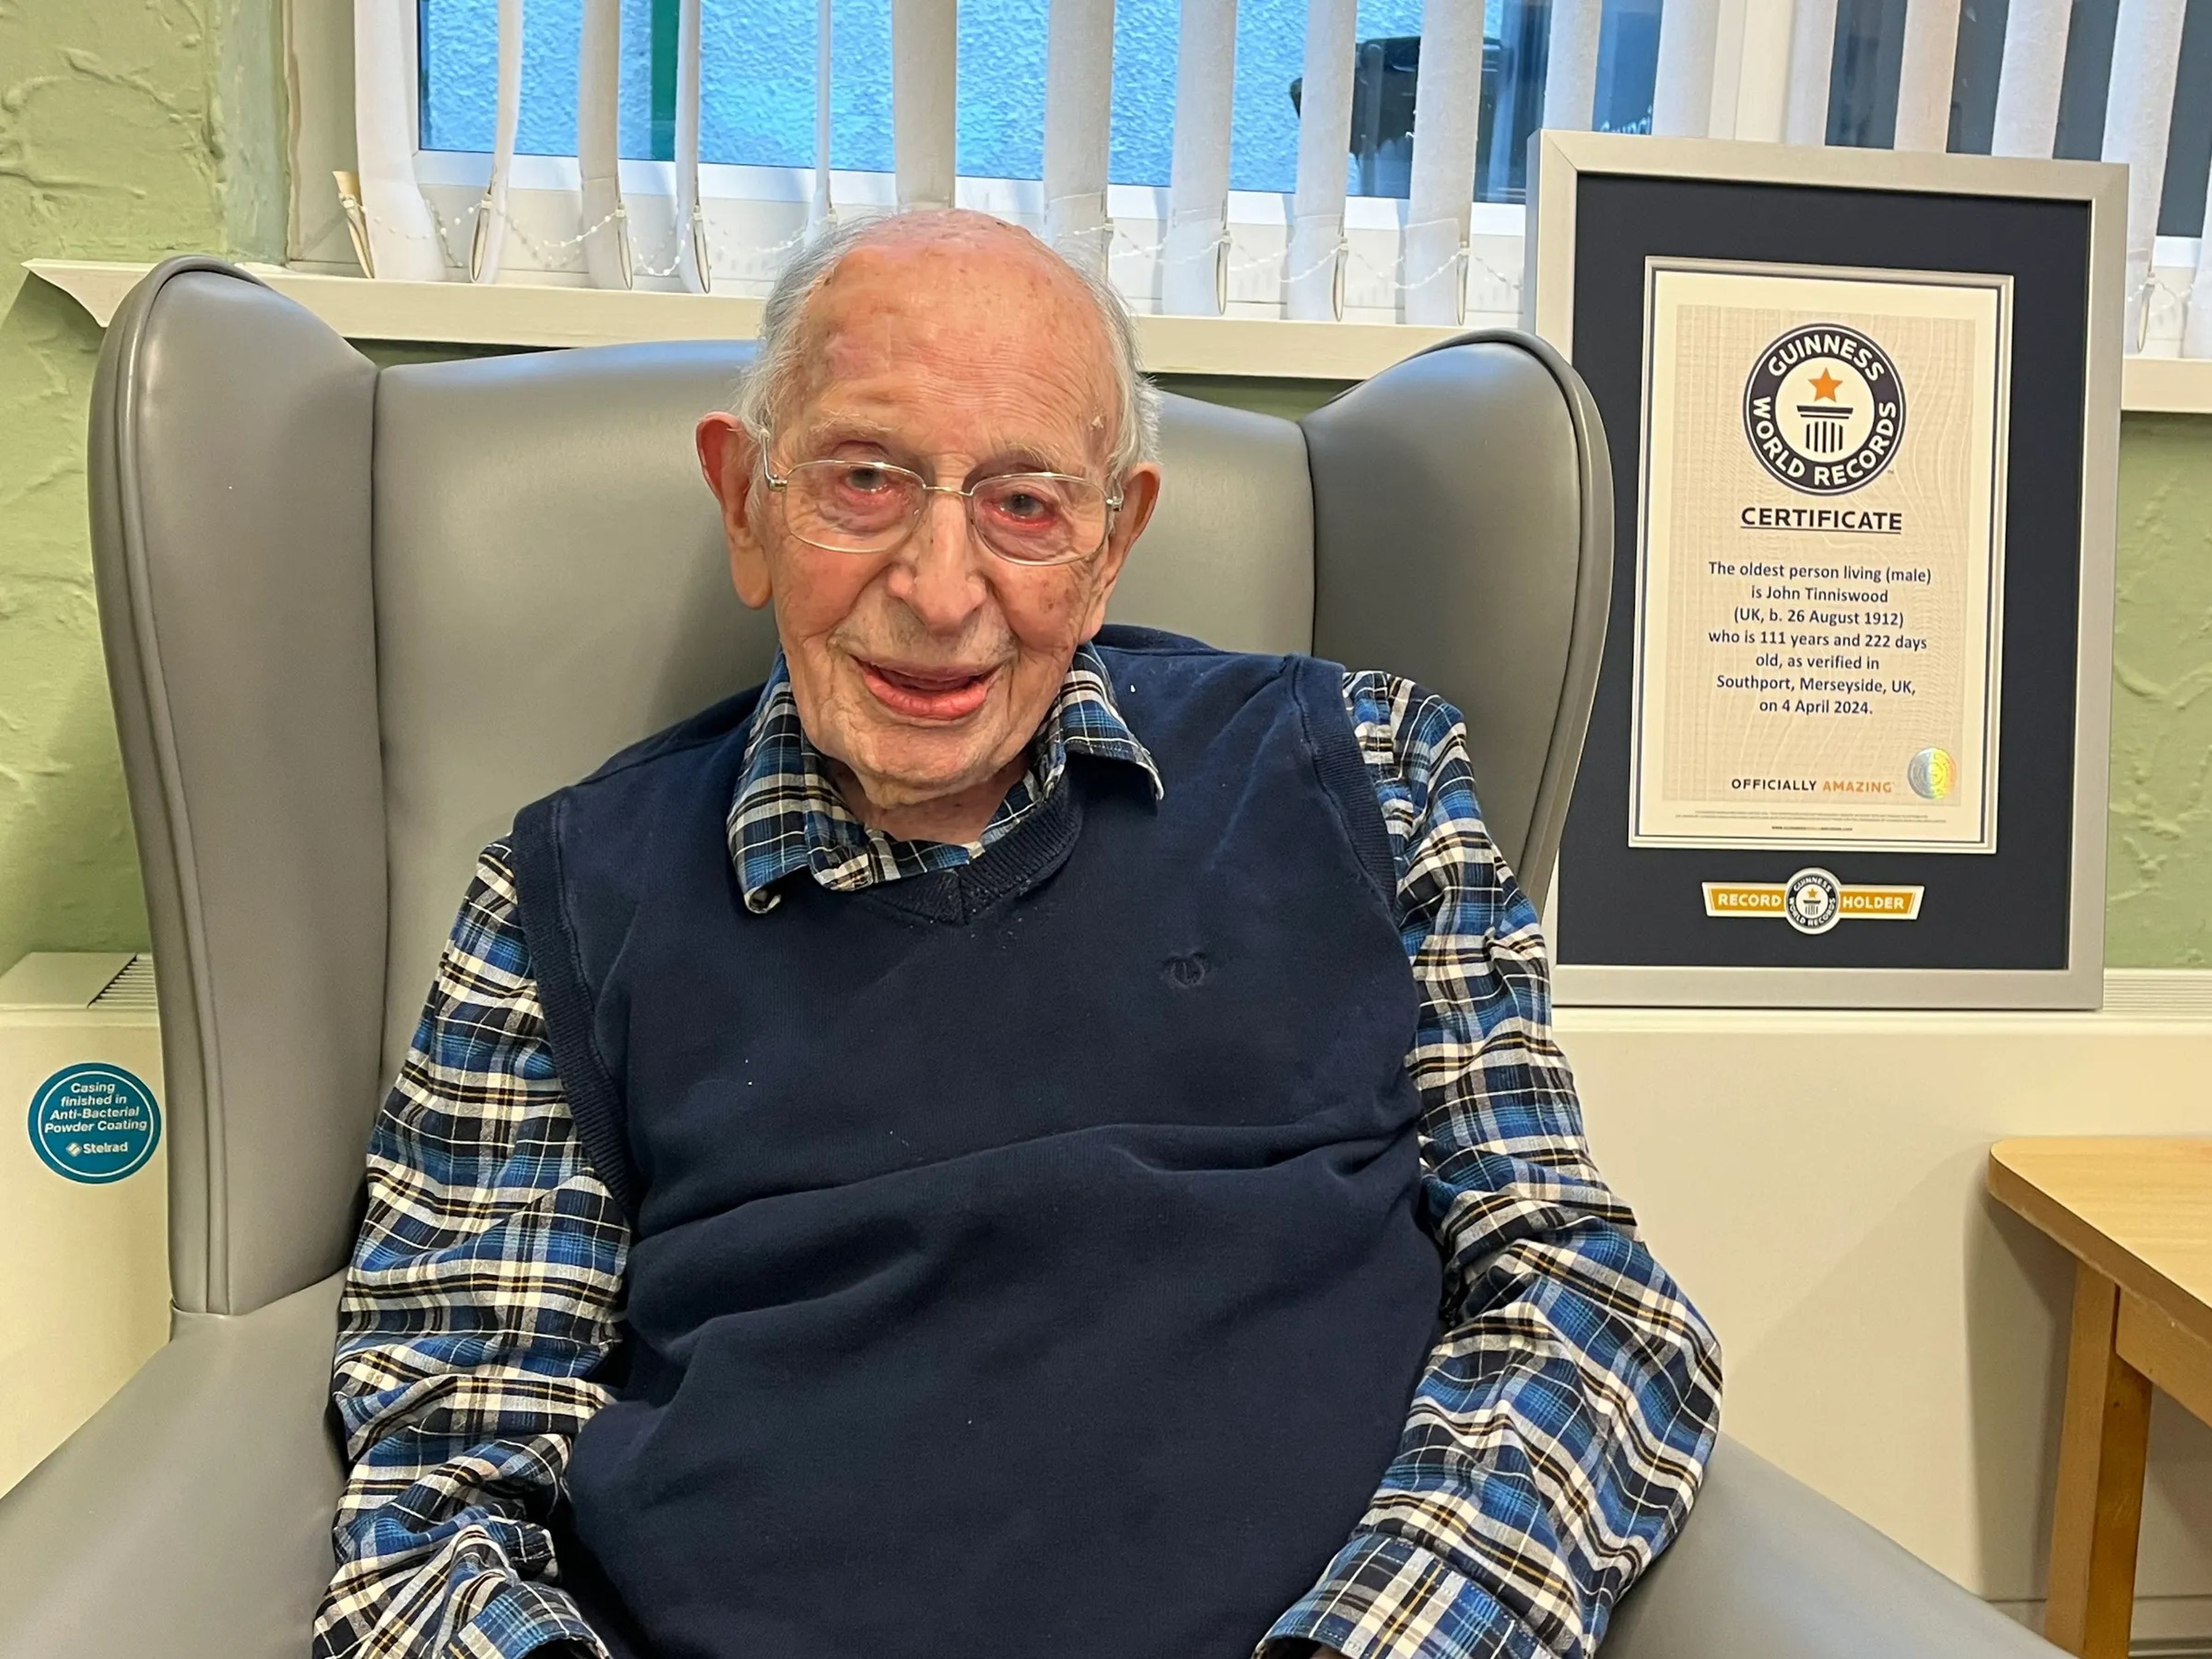 World's oldest man, Jon Tinniswood, with his certificate from Guinness World Records.